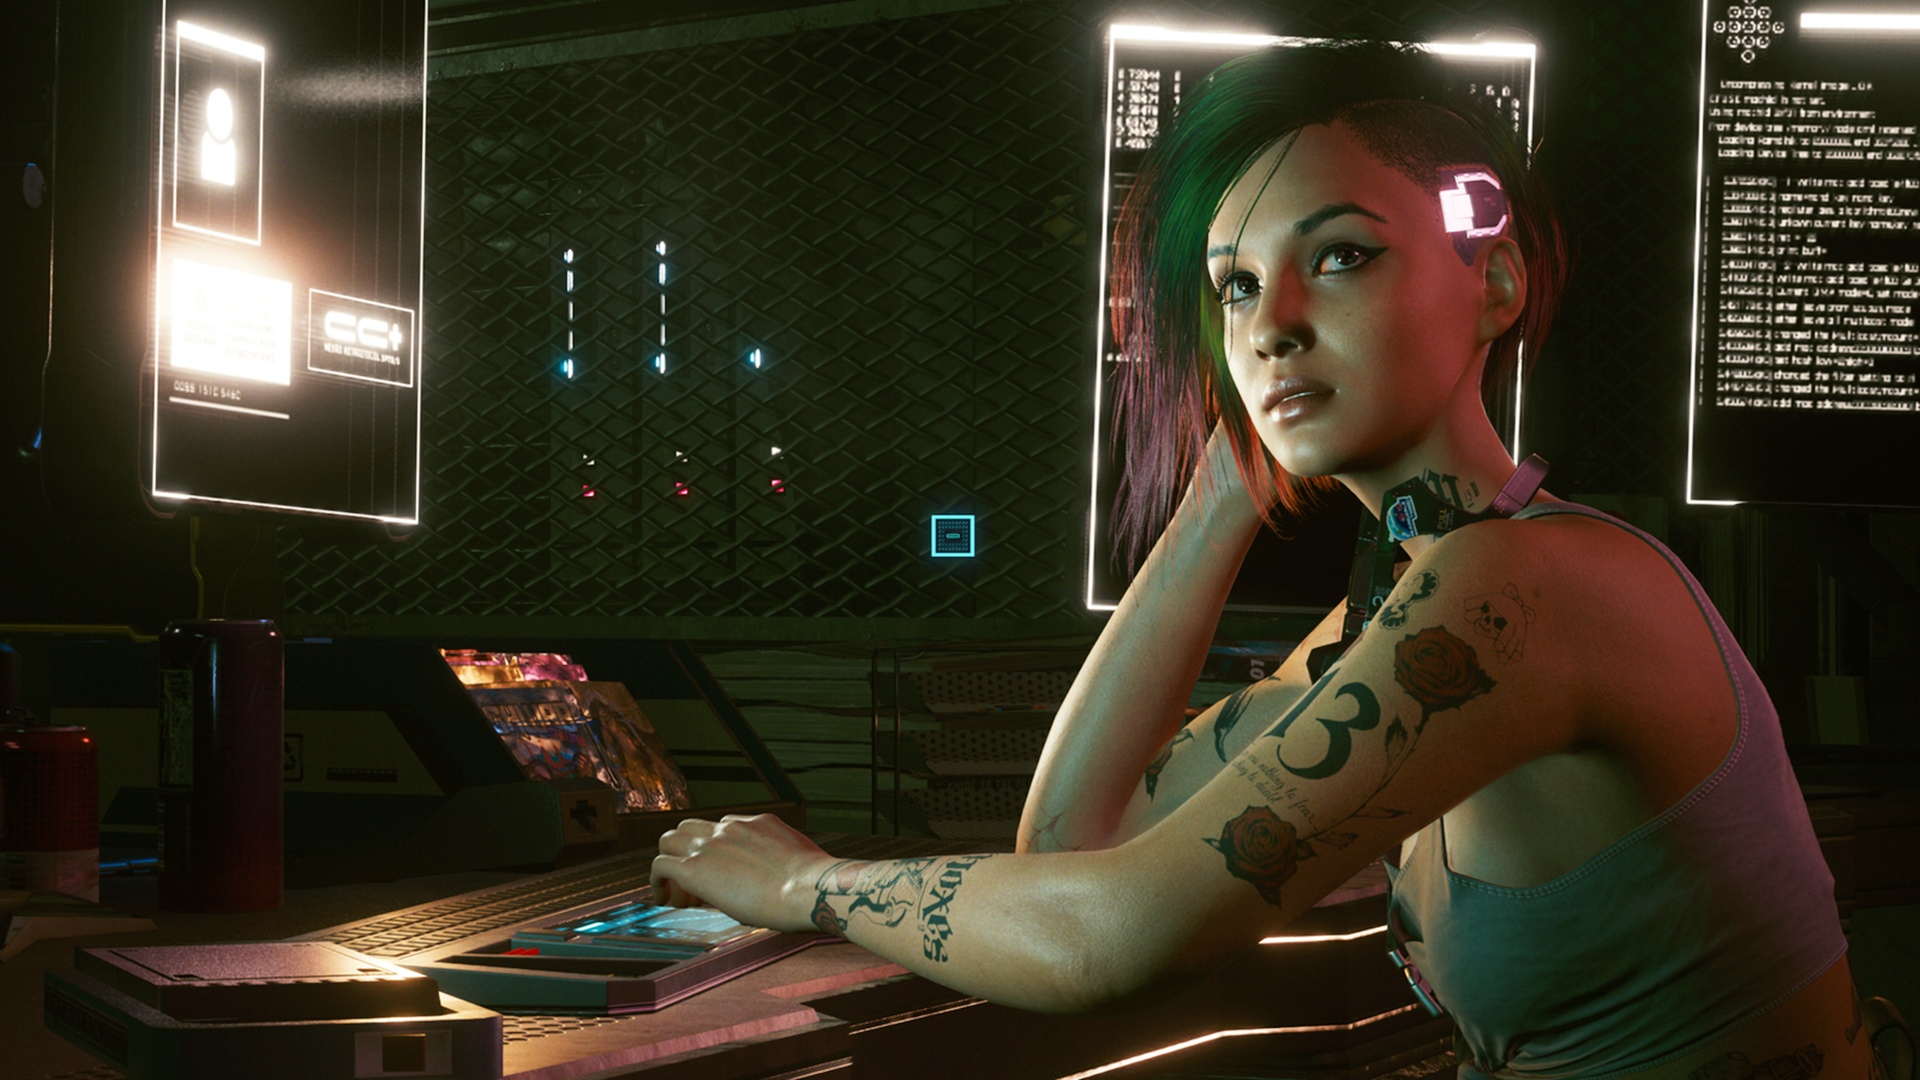 Cyberpunk 2077 is also another game where you can hack numerous systems.